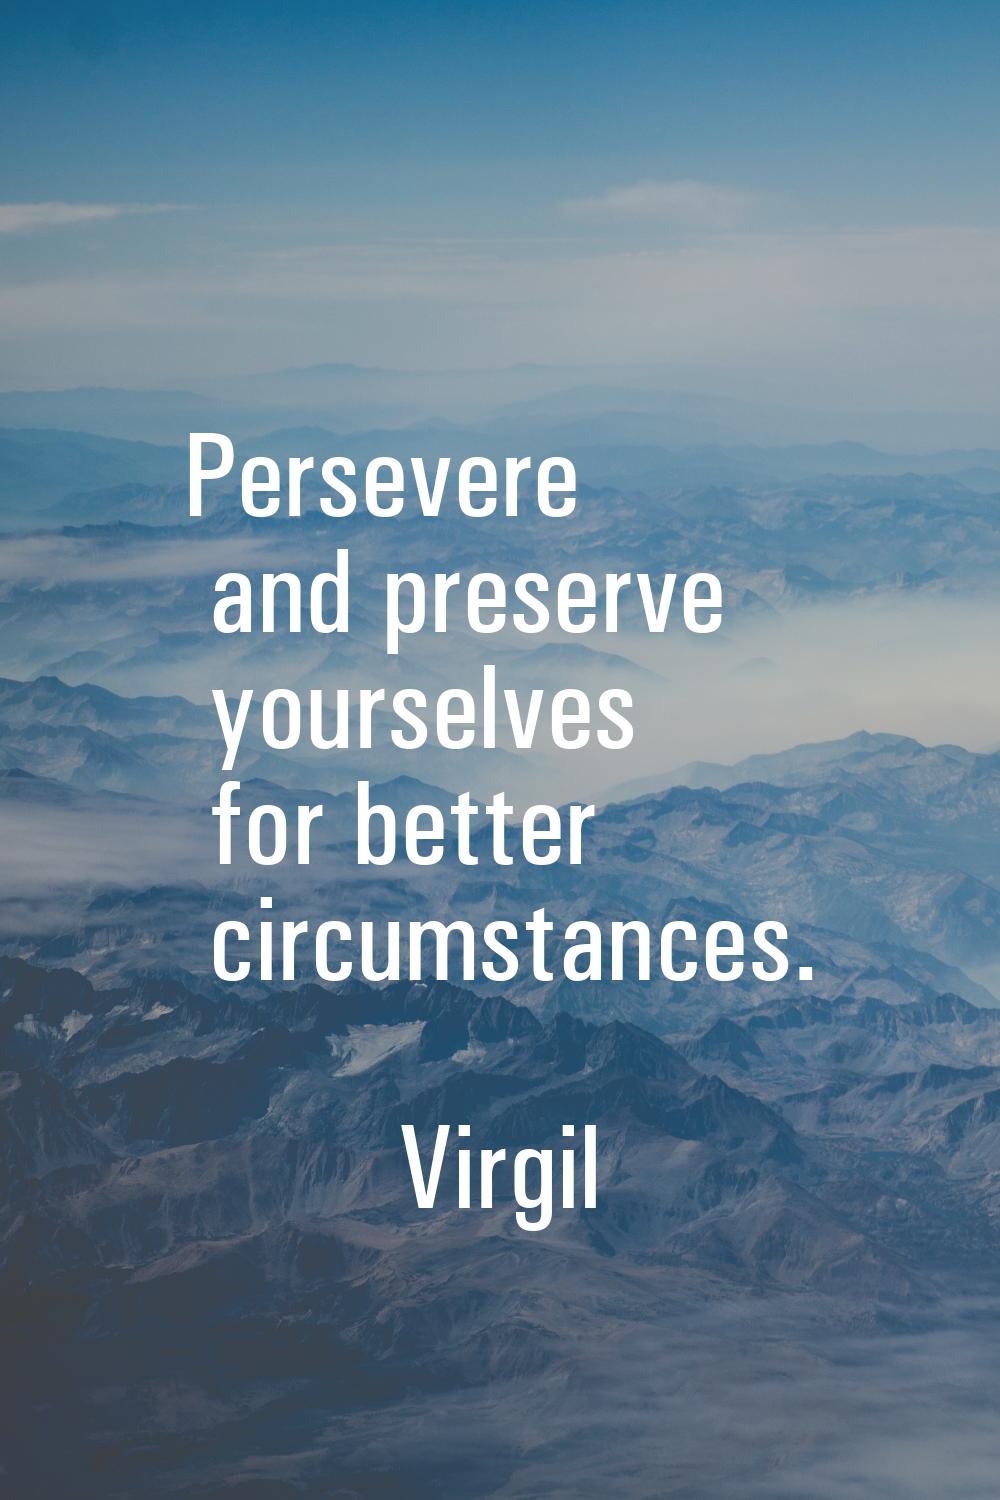 Persevere and preserve yourselves for better circumstances.